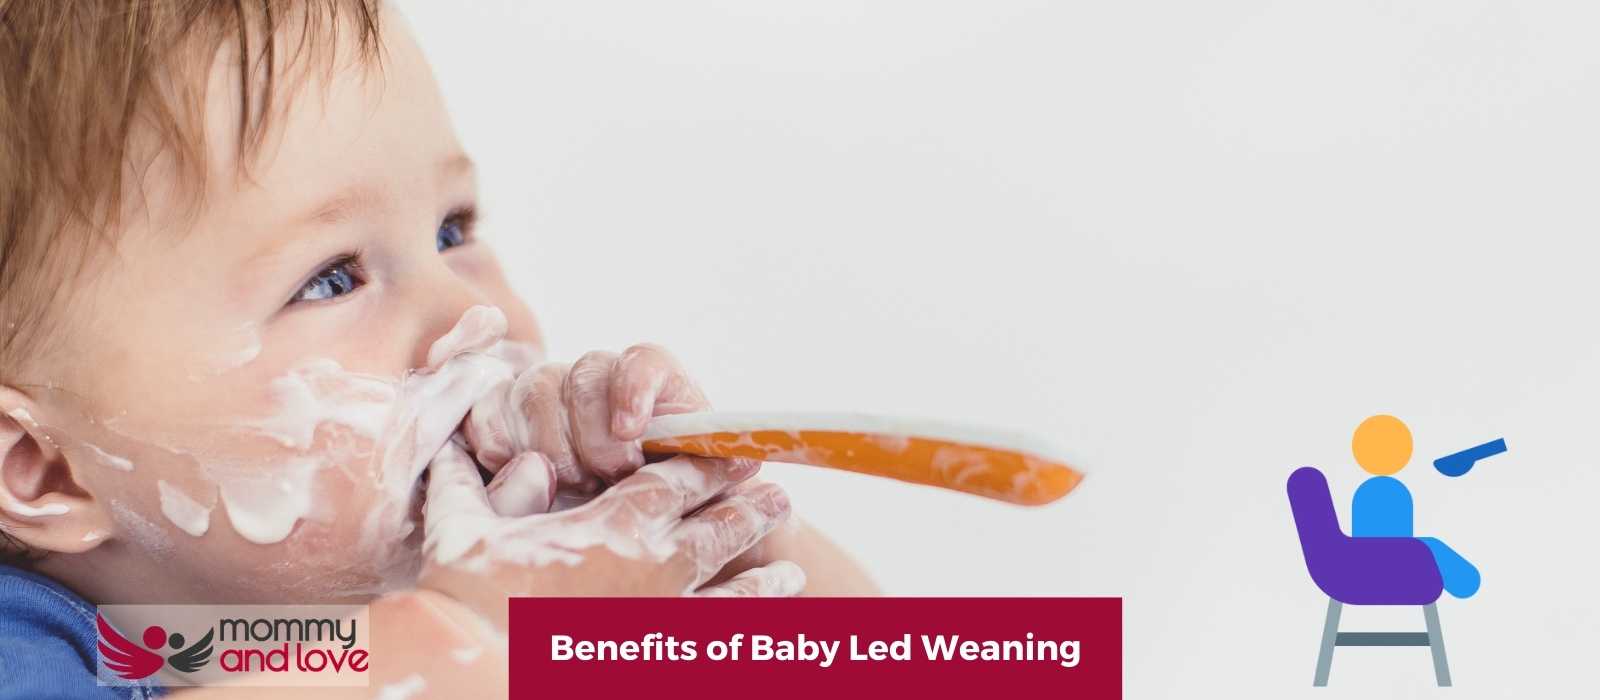 Benefits of Baby Led Weaning